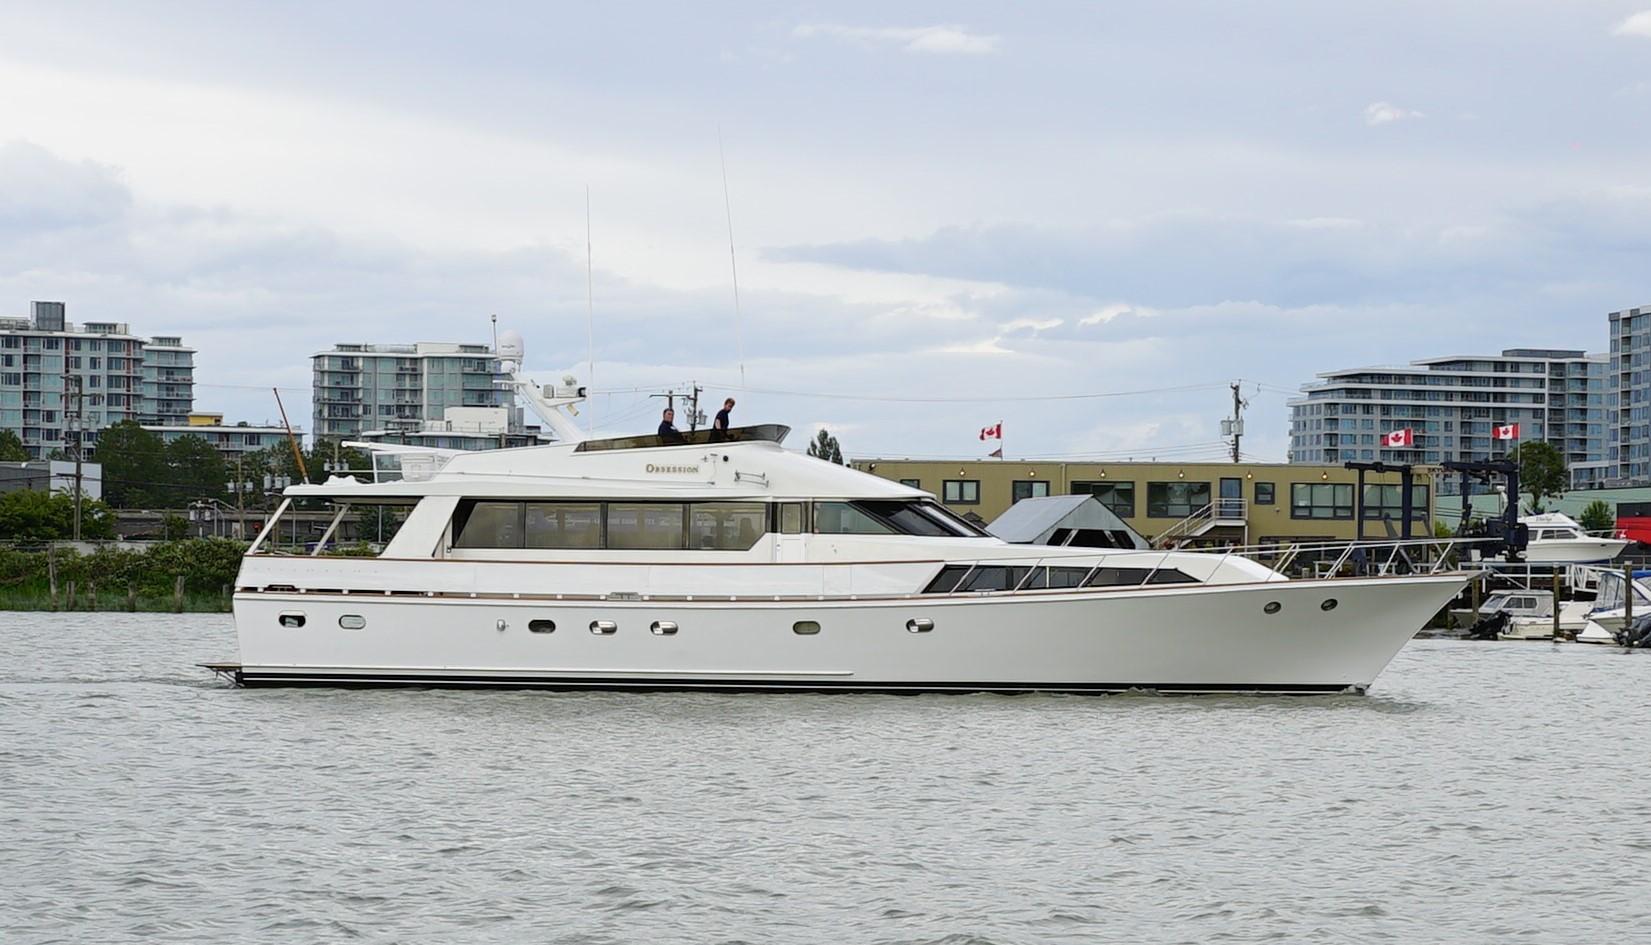 "obsession" Yacht Photos Pics 